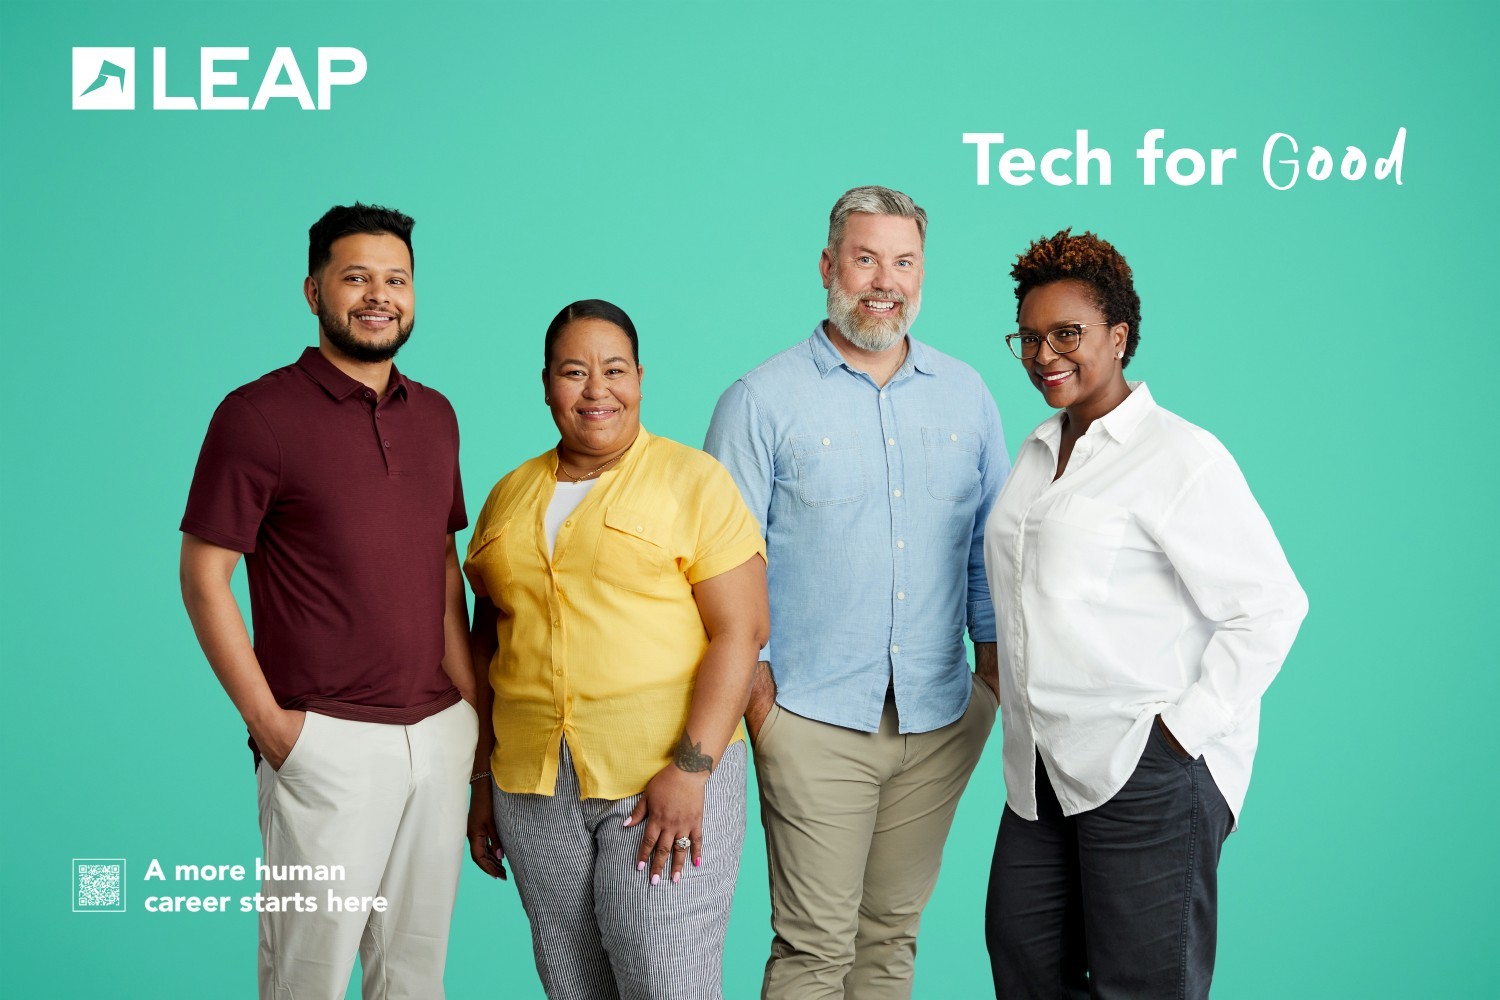 This year LEAP launched our Employee Value Proposition.